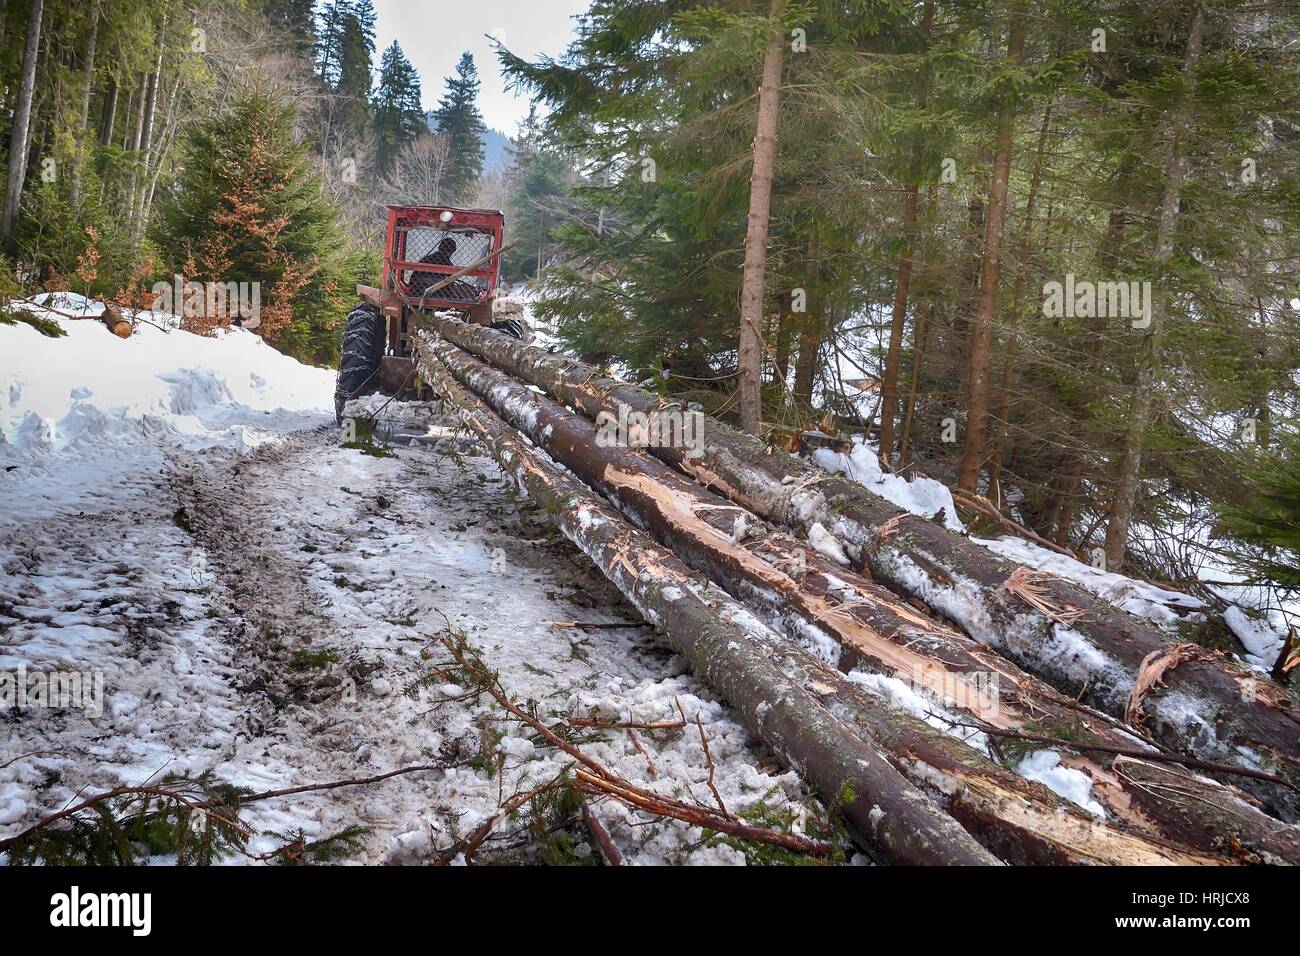 Skidding timber / Tractor is skidding cut trees out of the forest. Stock Photo